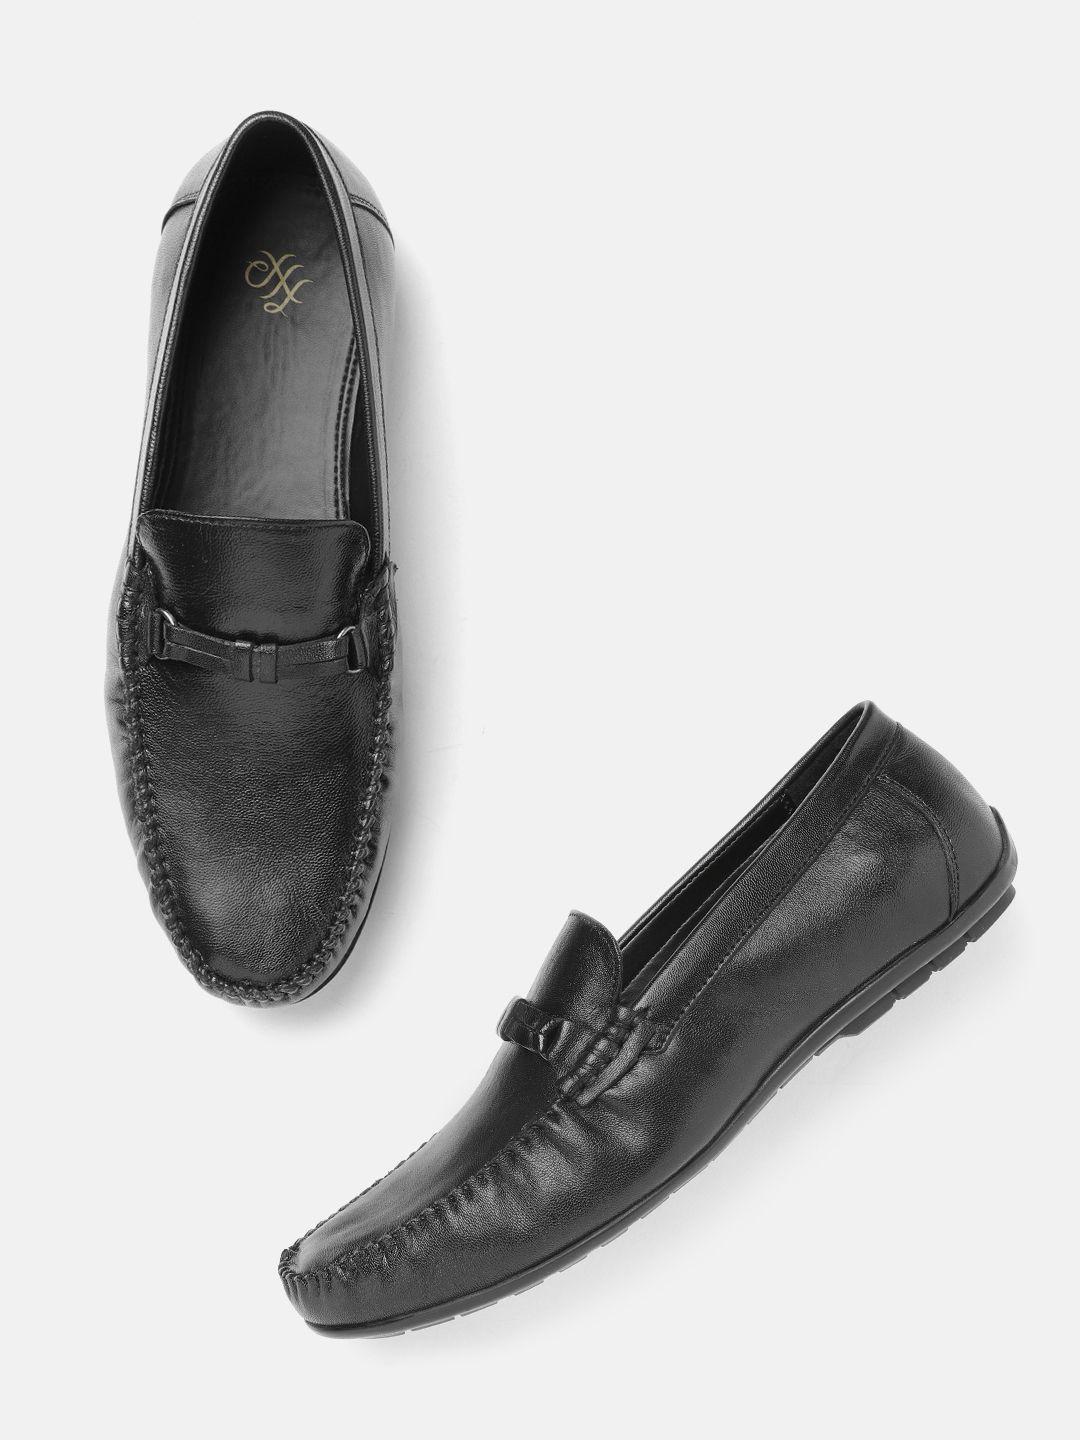 house of pataudi men black solid leather driving shoes